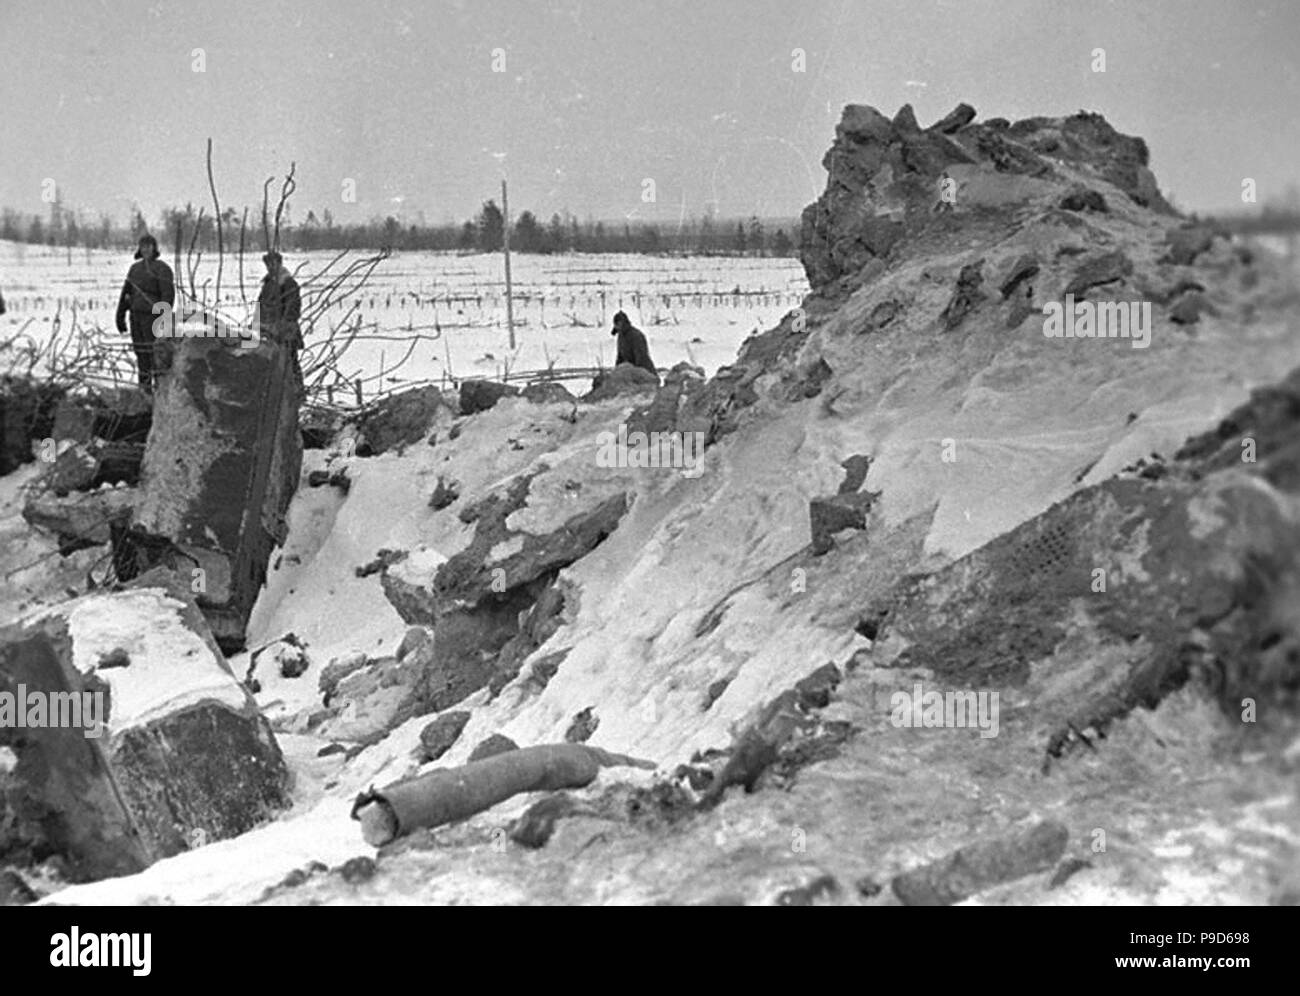 View of the Mannerheim Line. The Winter War. 1939. Museum: Russian State Film and Photo Archive, Krasnogorsk. Stock Photo